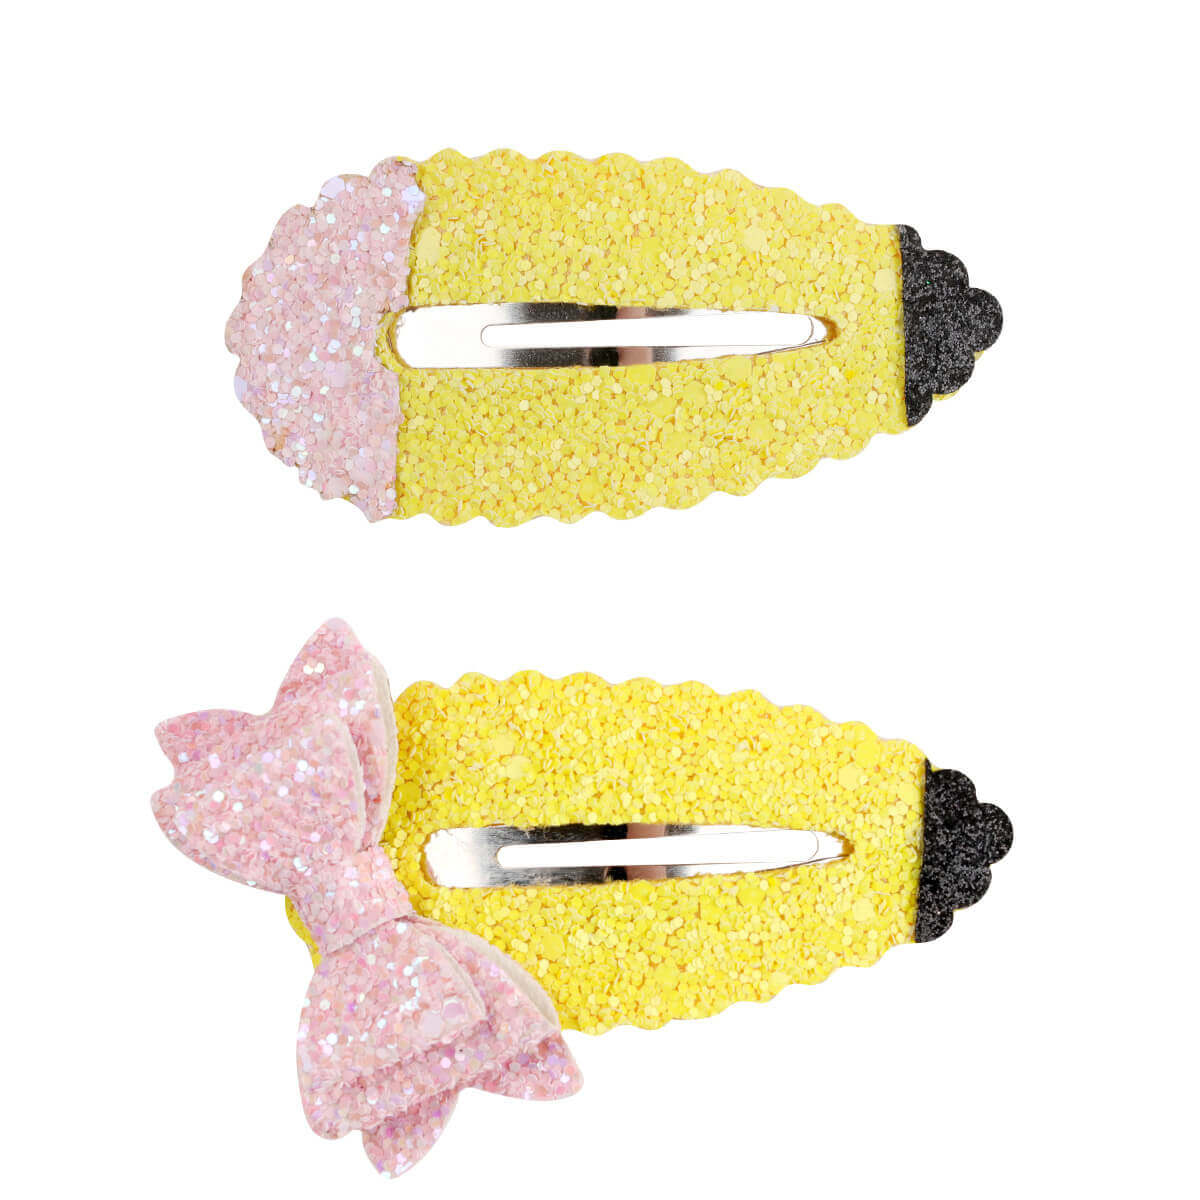 2PCS Back to School Snap Hair Clips